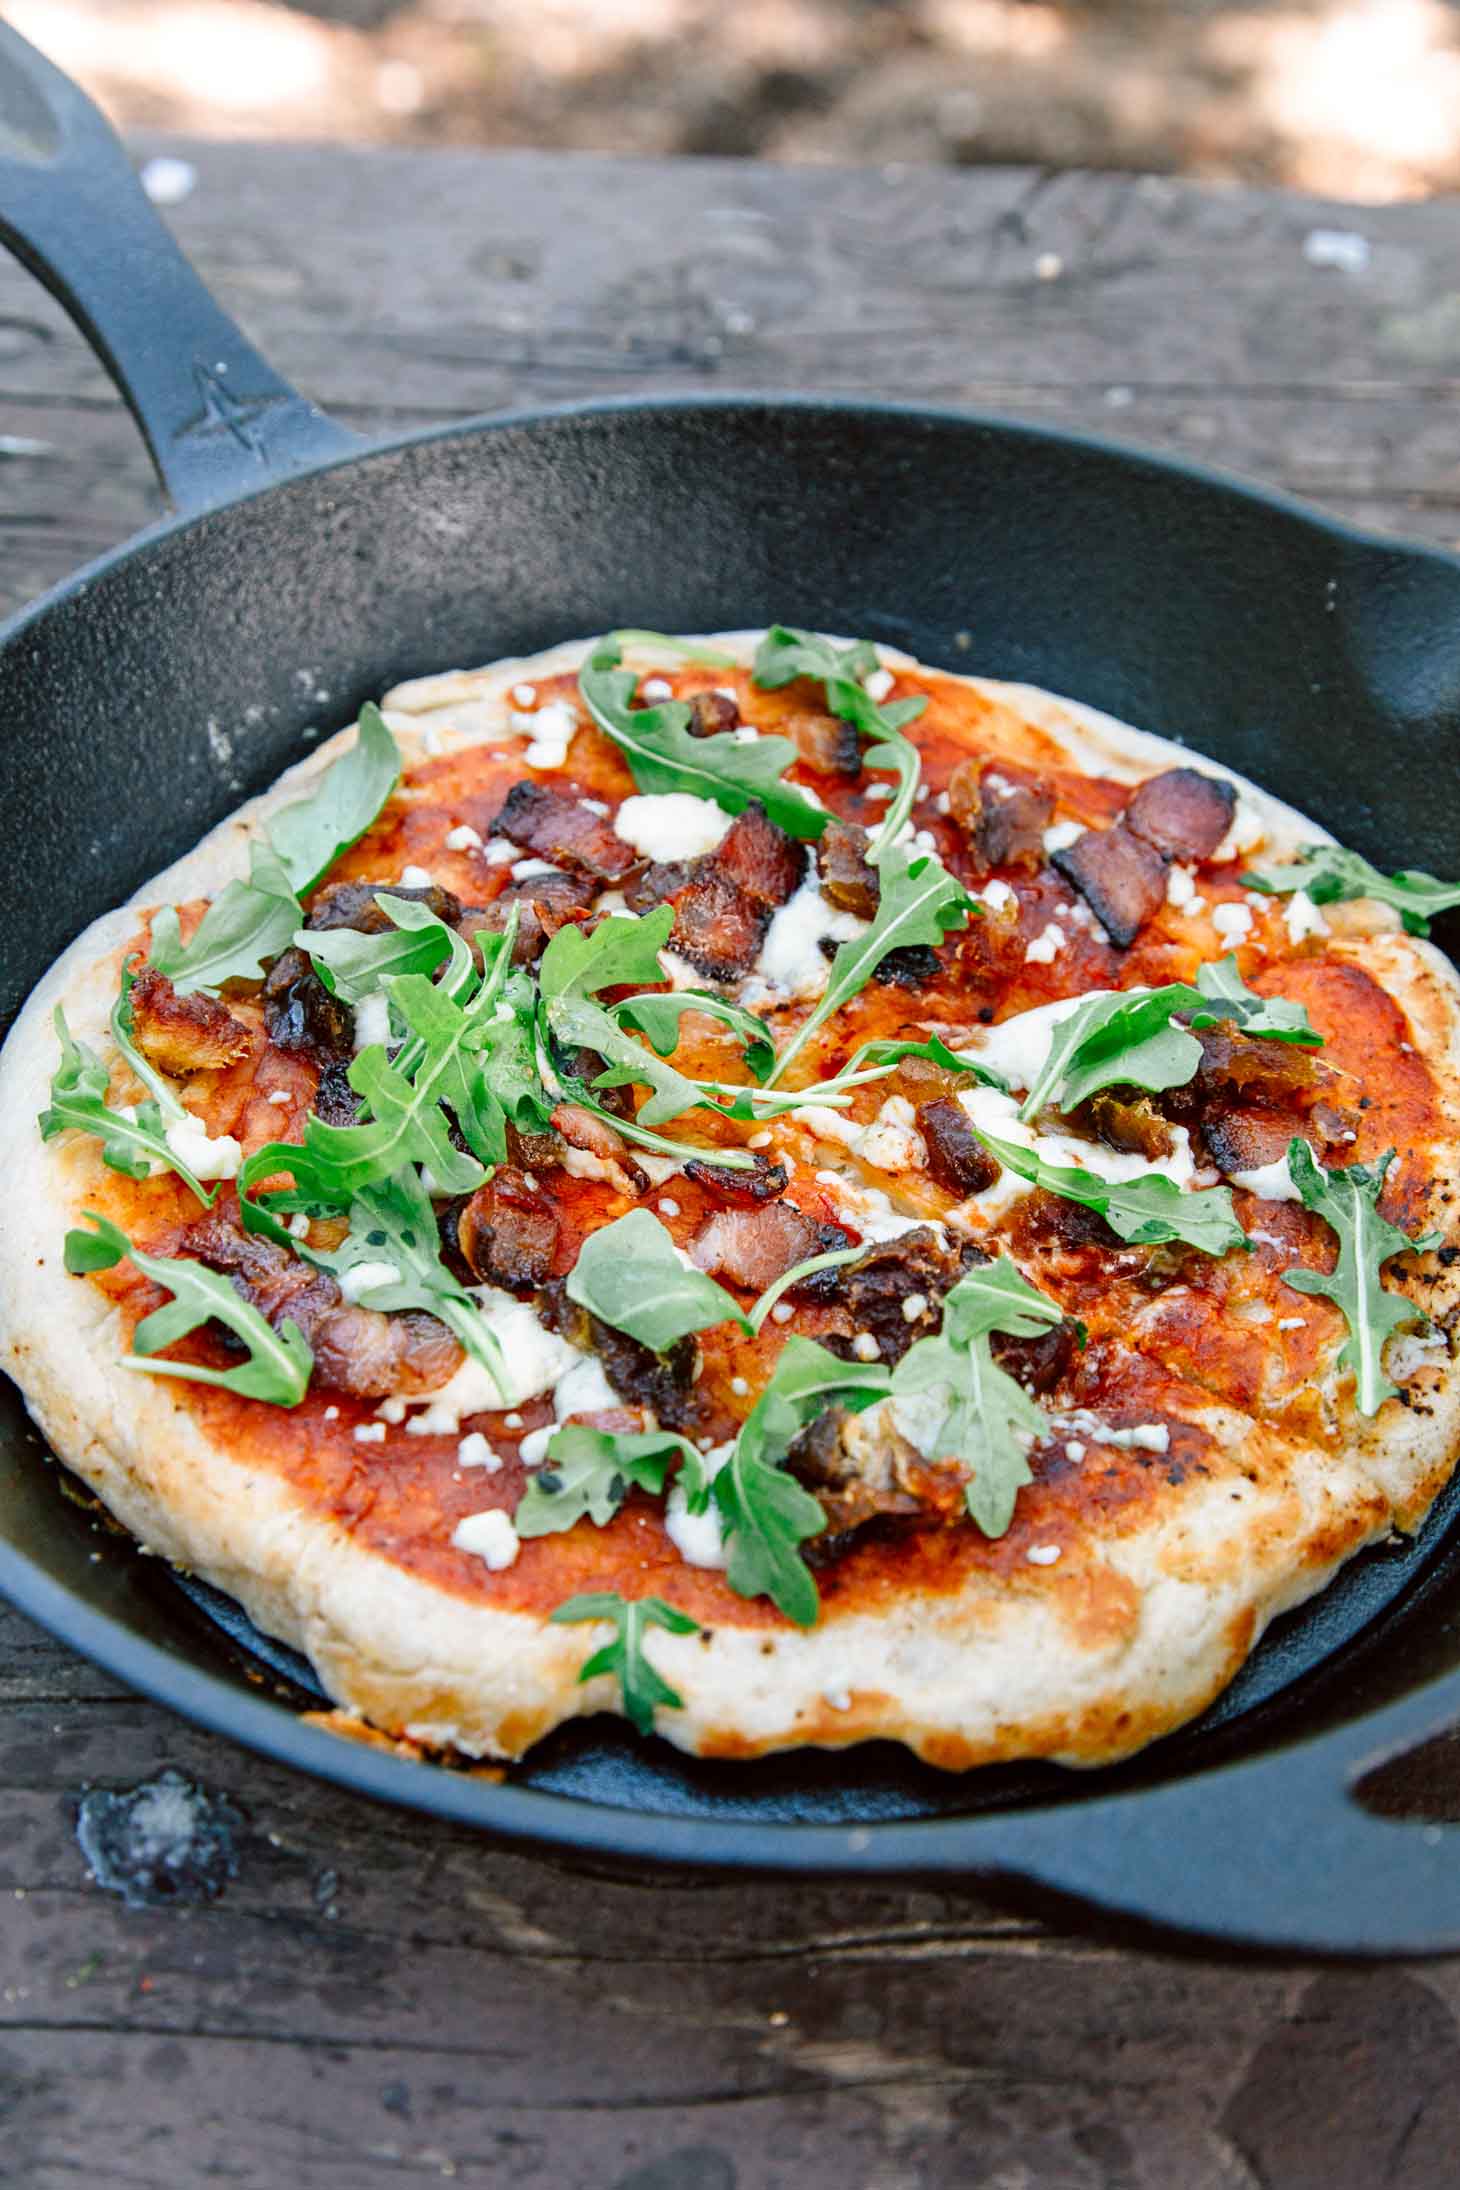 Bacon & Date Campfire Pizza - Camping Dinner Ideas